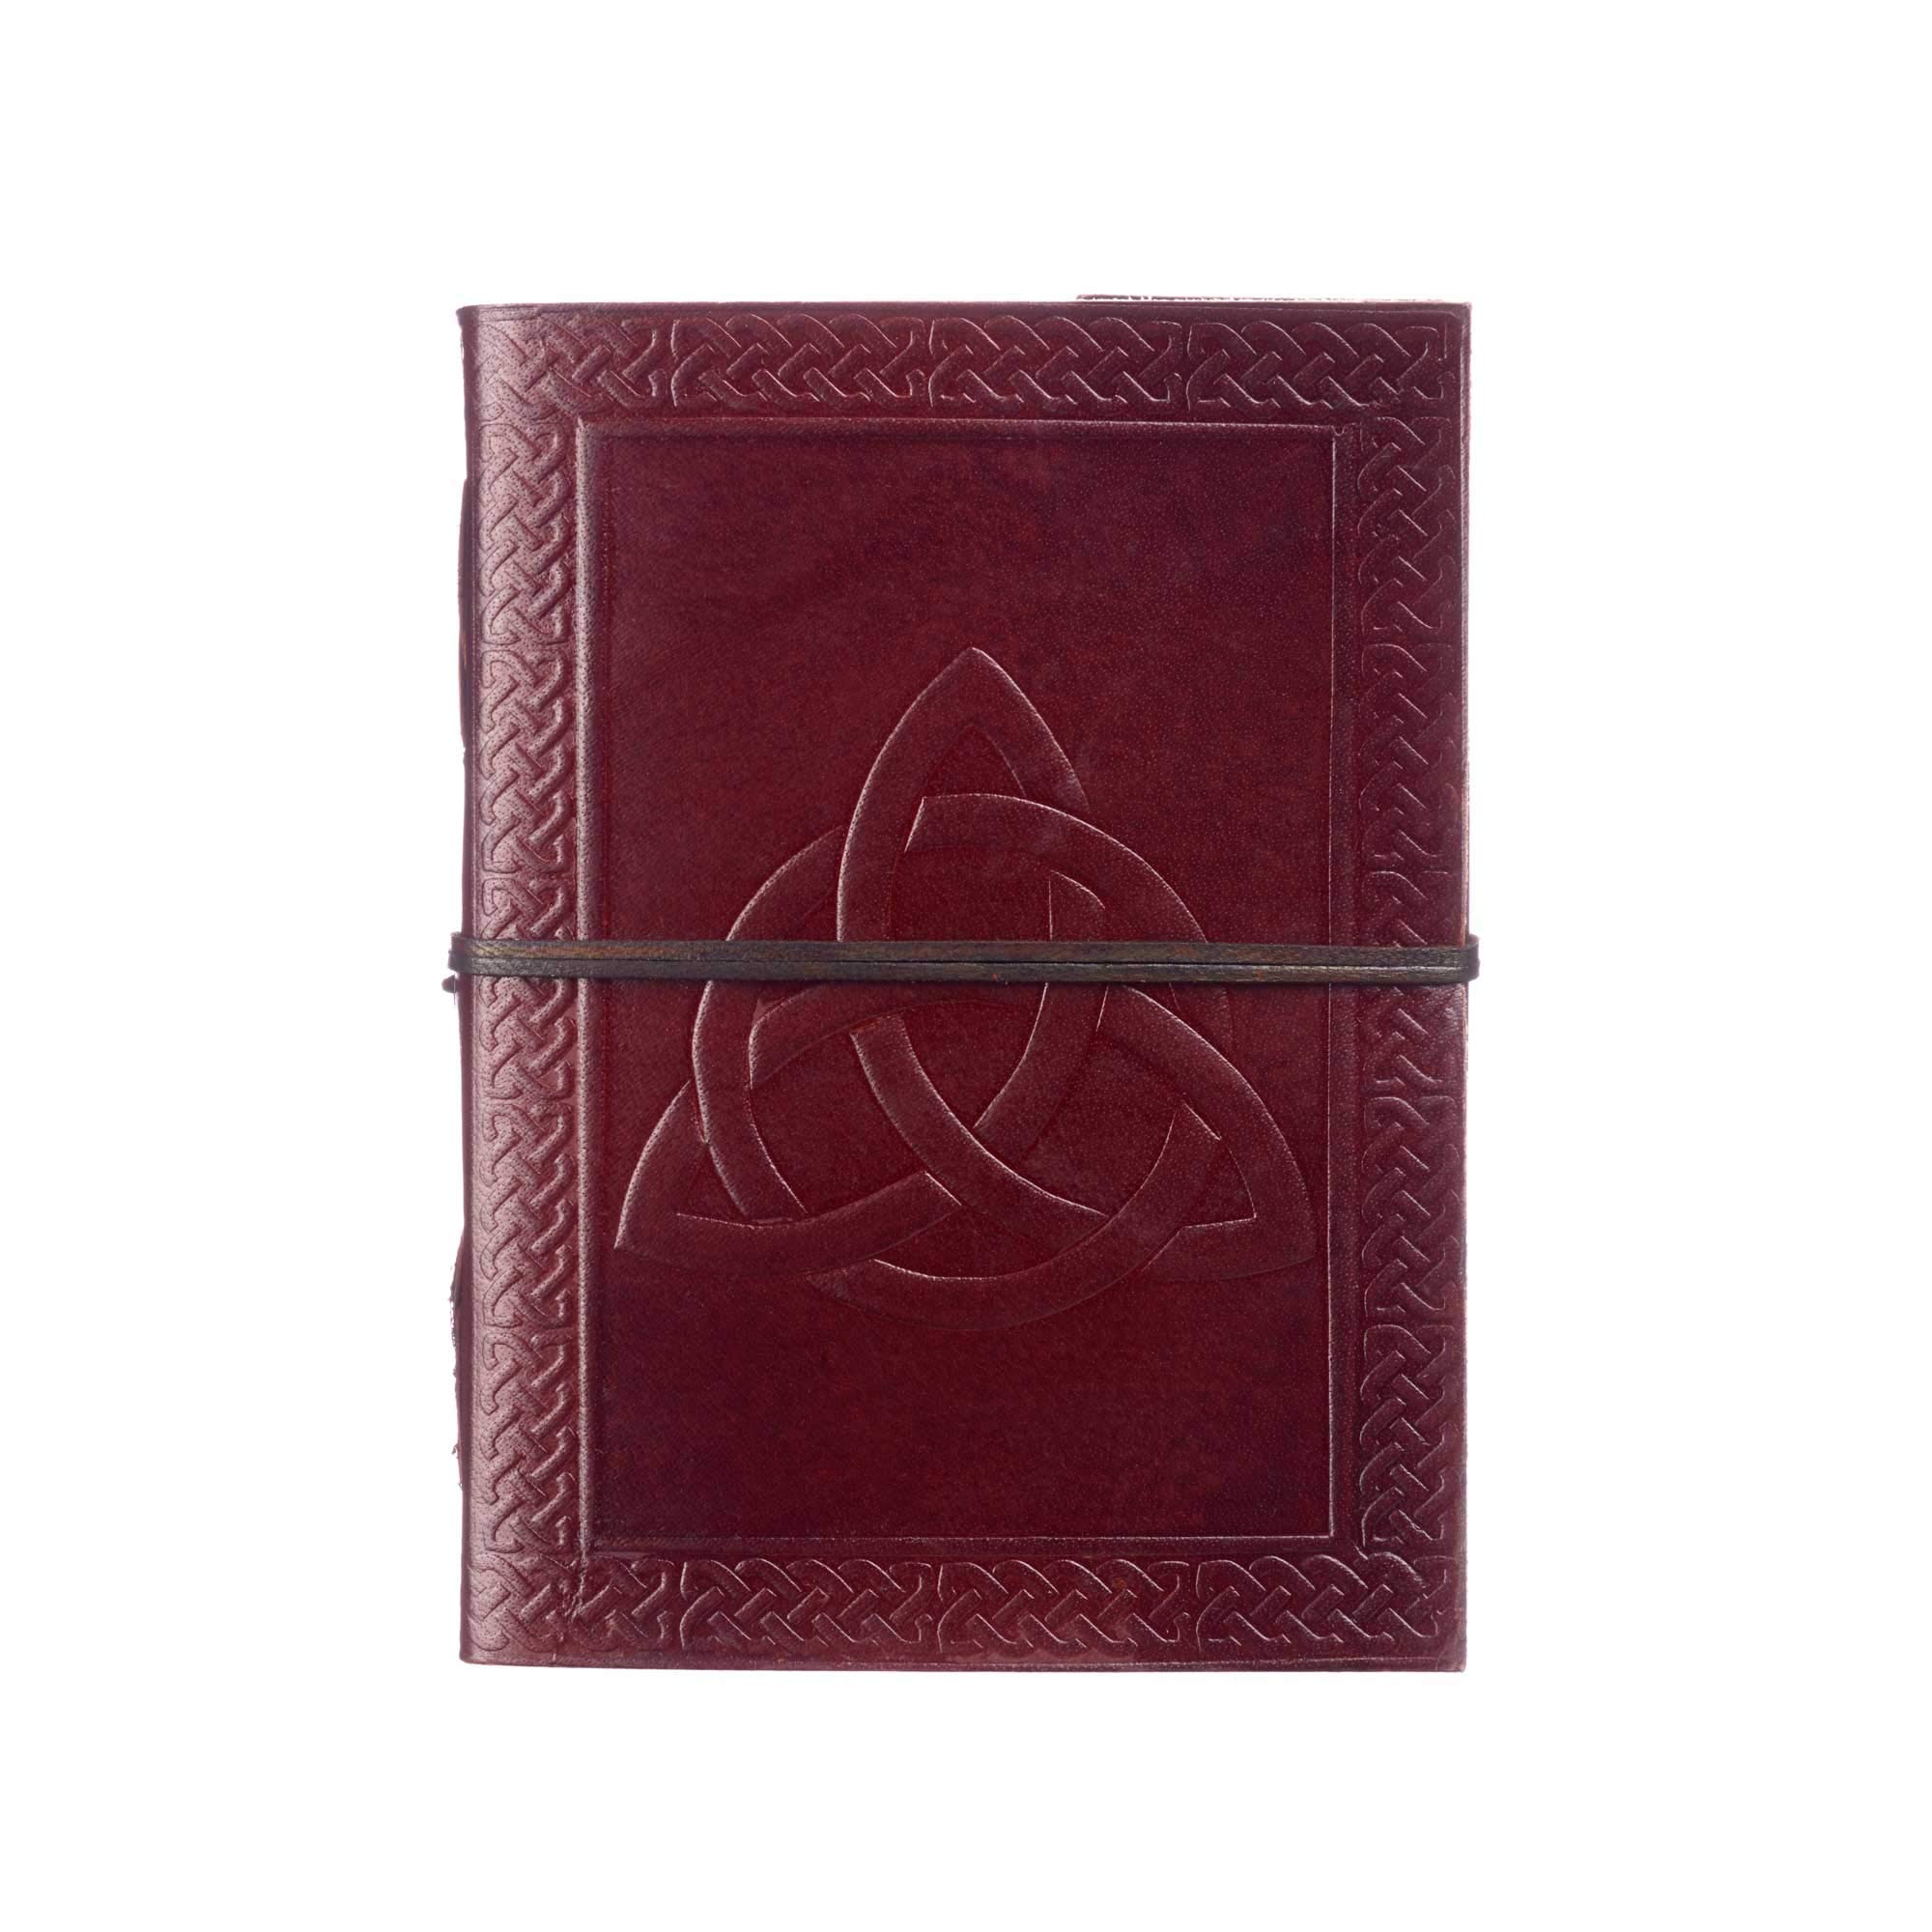 Celtic Trinity Knot Leather Journal | 13.5cm x 18.5cm | Handmade, Fair Trade & Eco Friendly Leather Bound Notebook Alternative For Men and Women